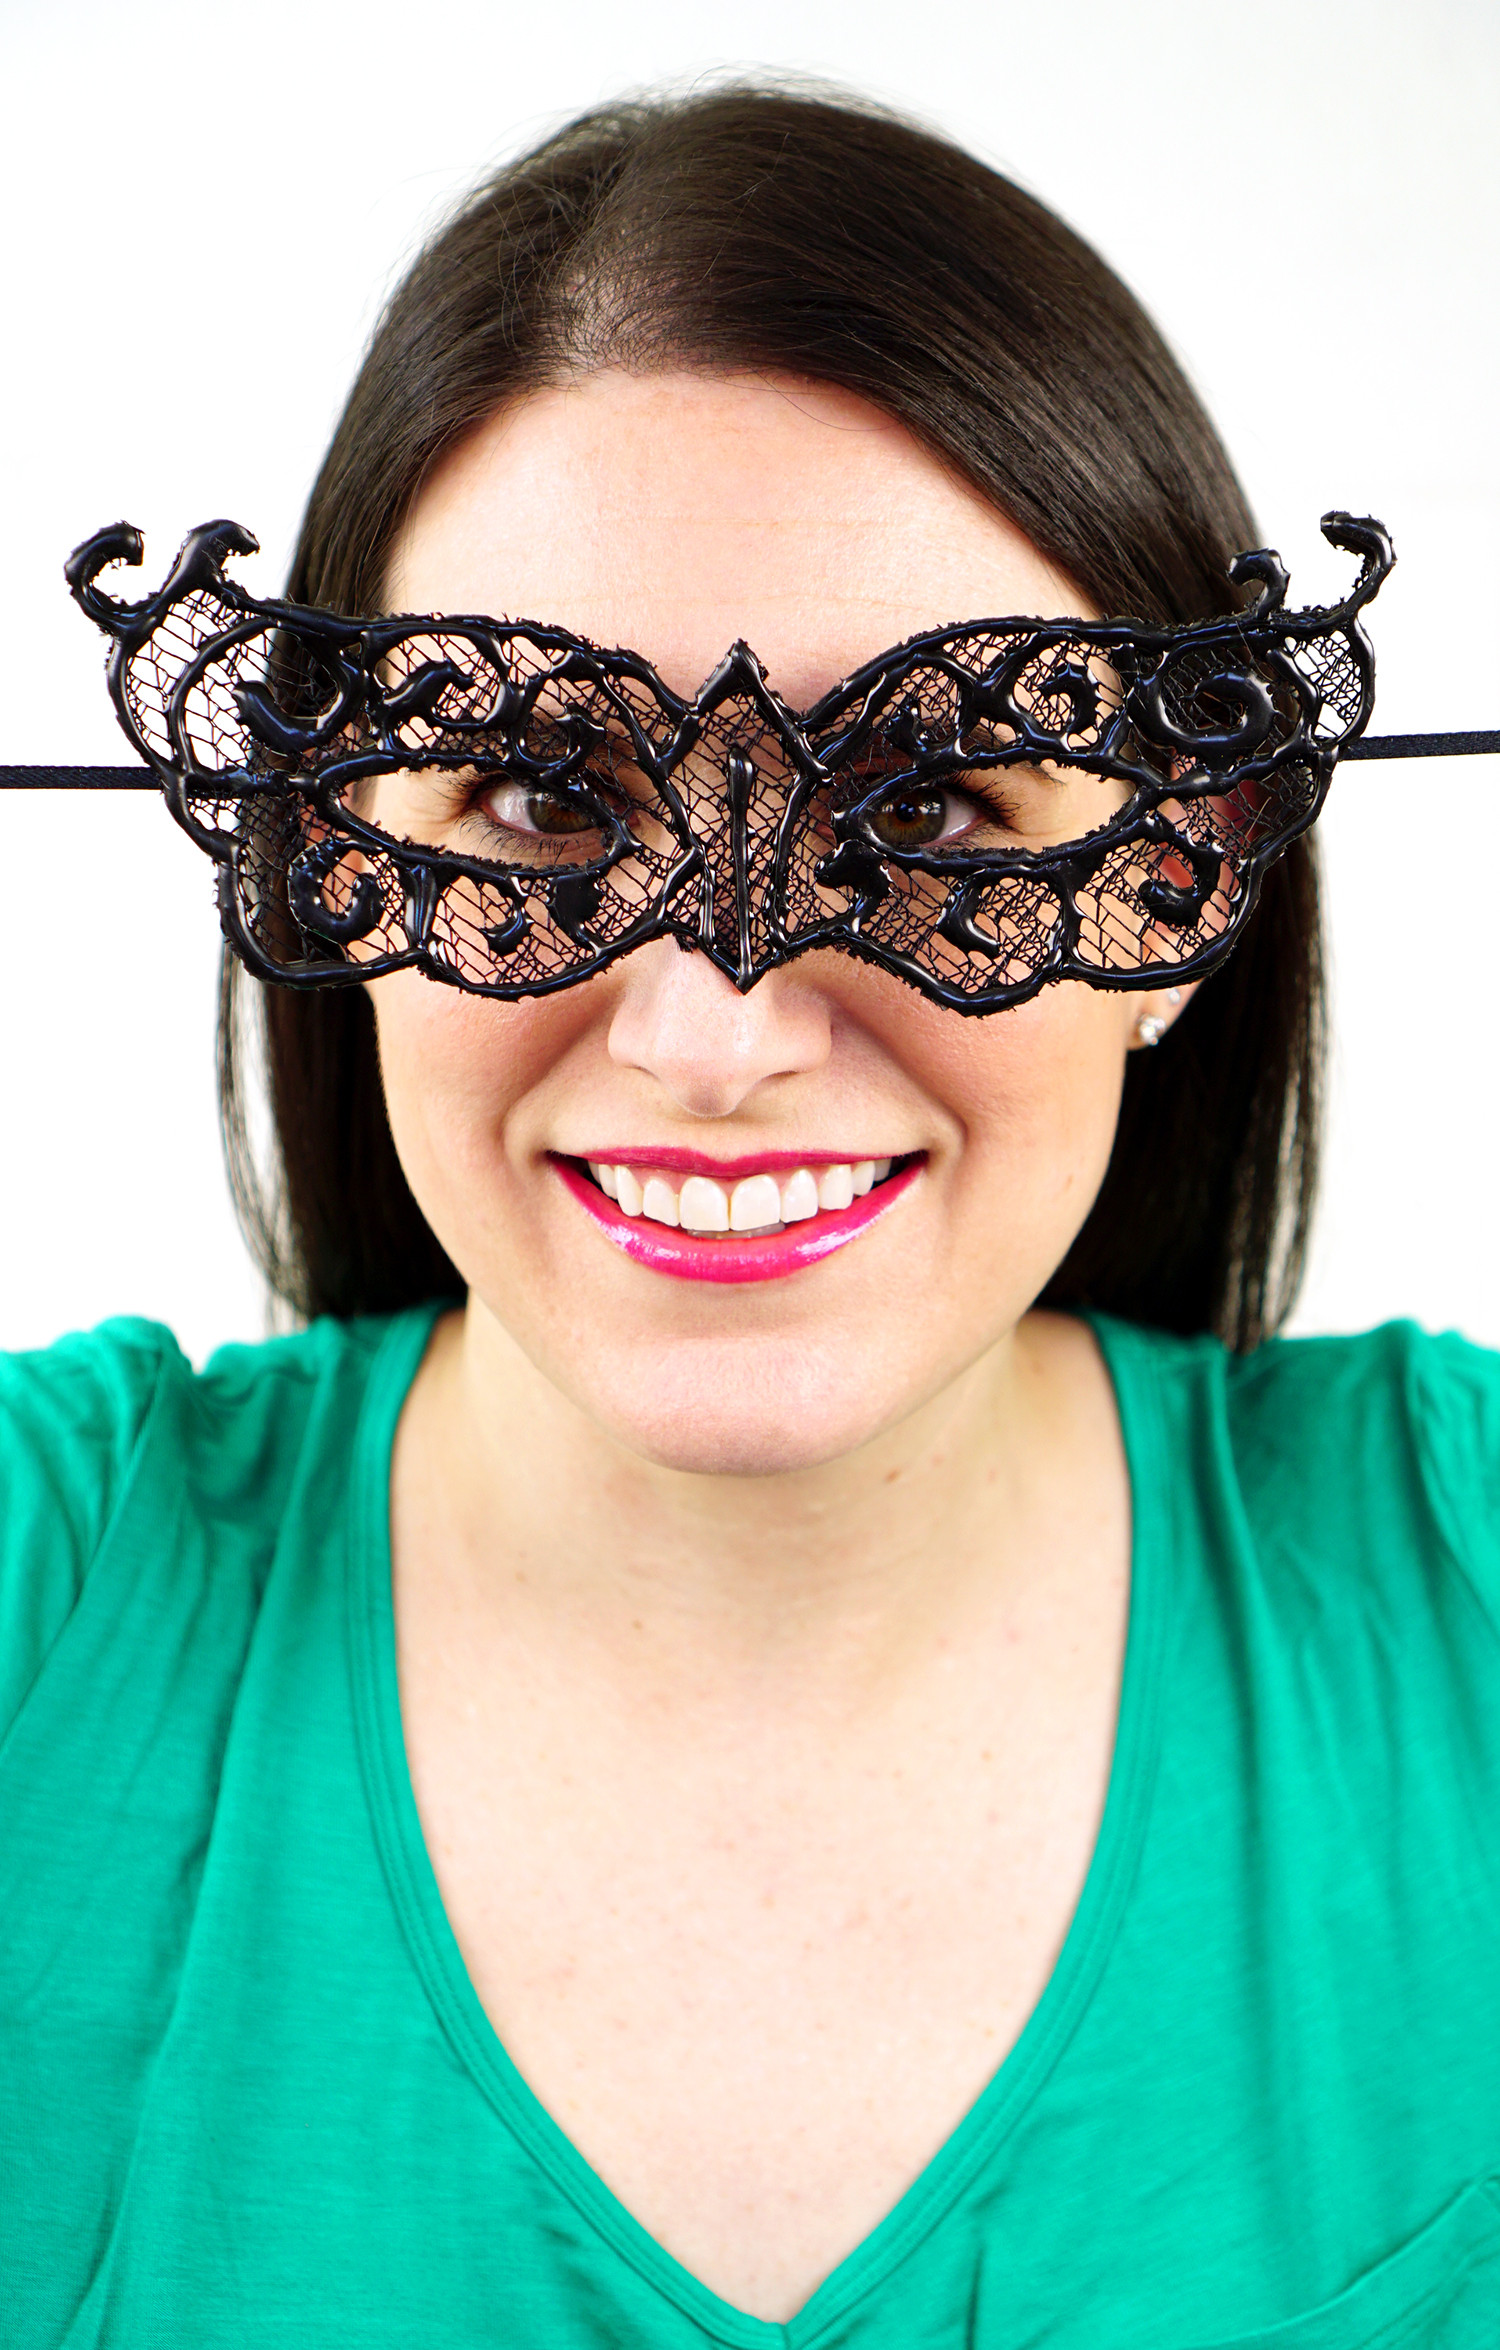 DIY Lace Mask
 Easy DIY Lace Masquerade Mask from Hot Glue Happiness is